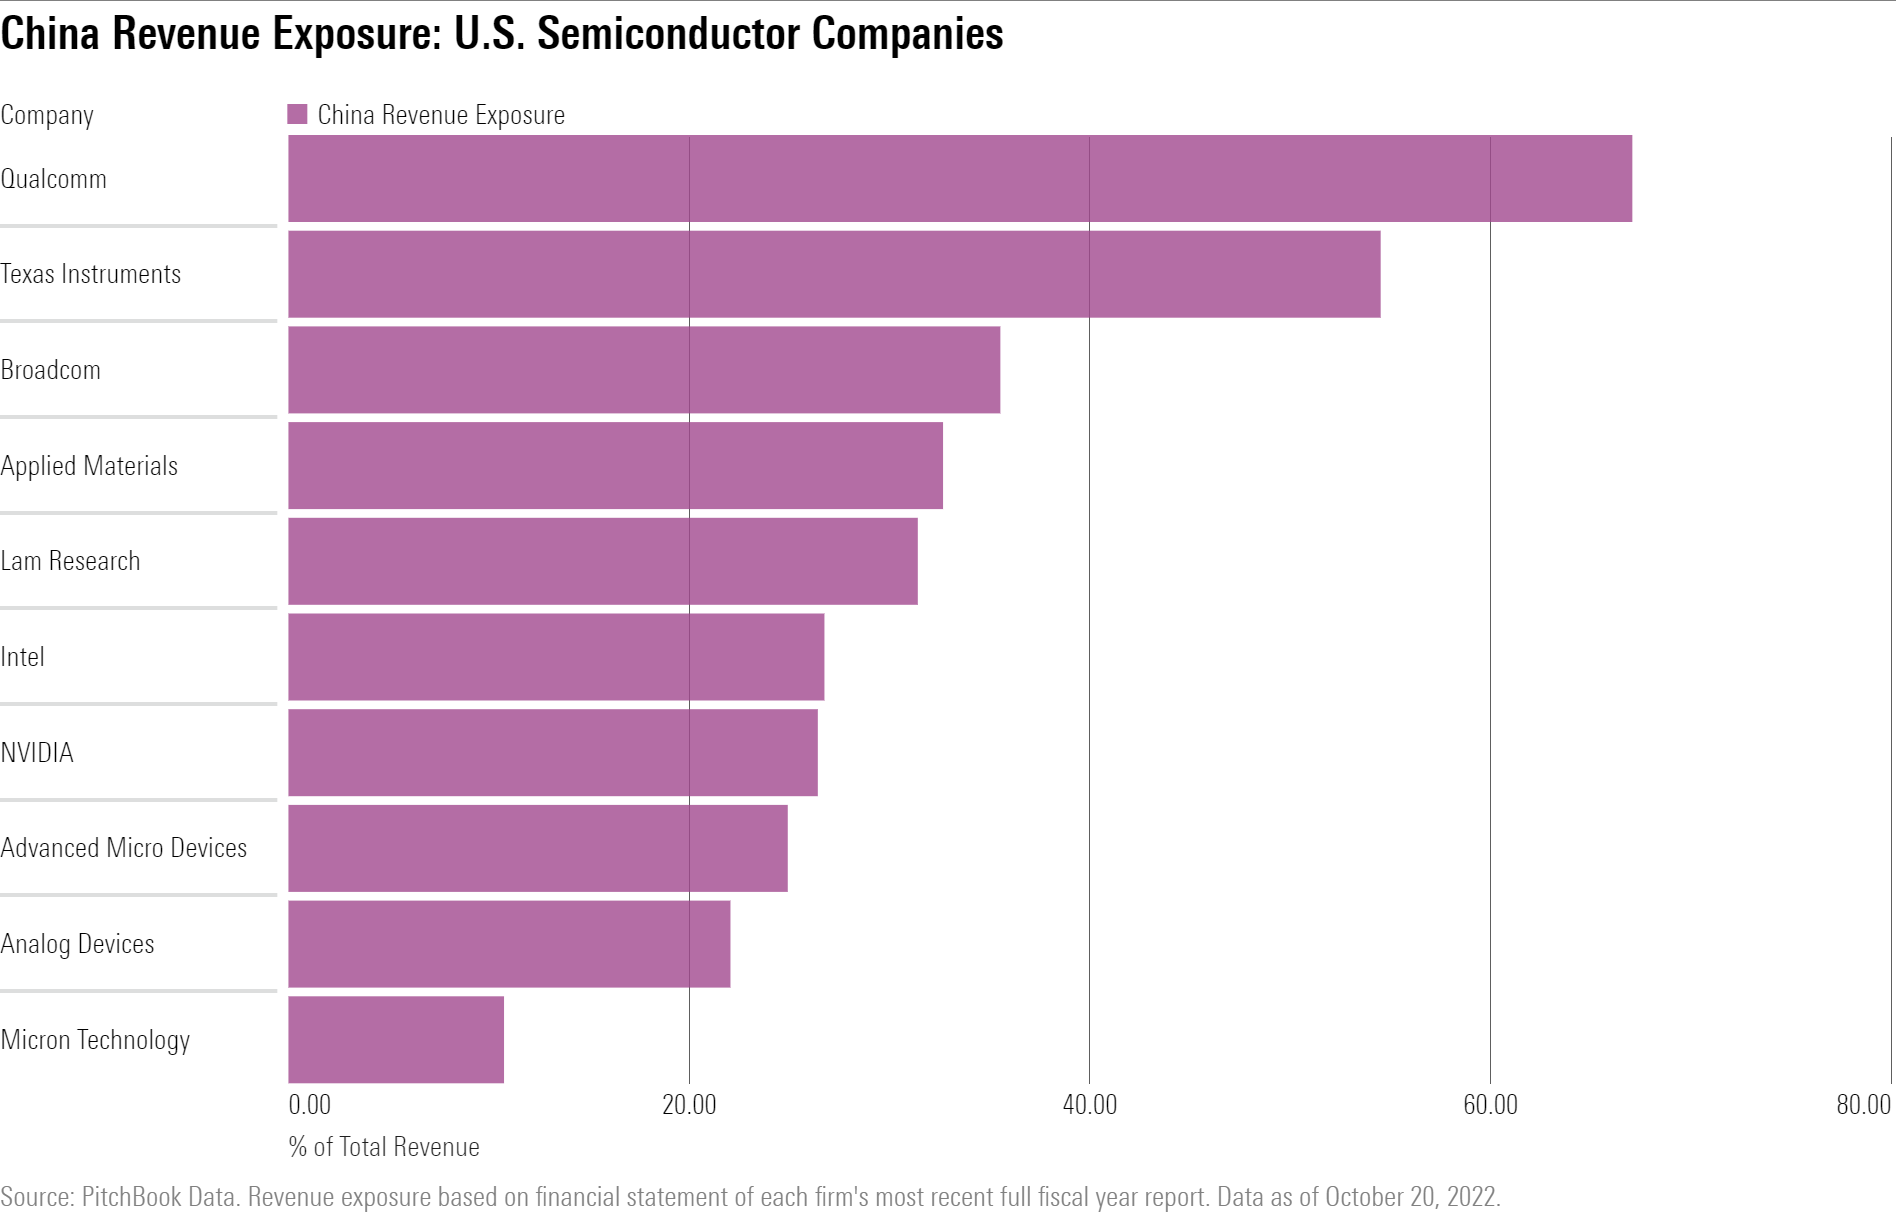 A horizontal bar chart showing U.S.-listed semiconductor companies' revenue exposure to China.